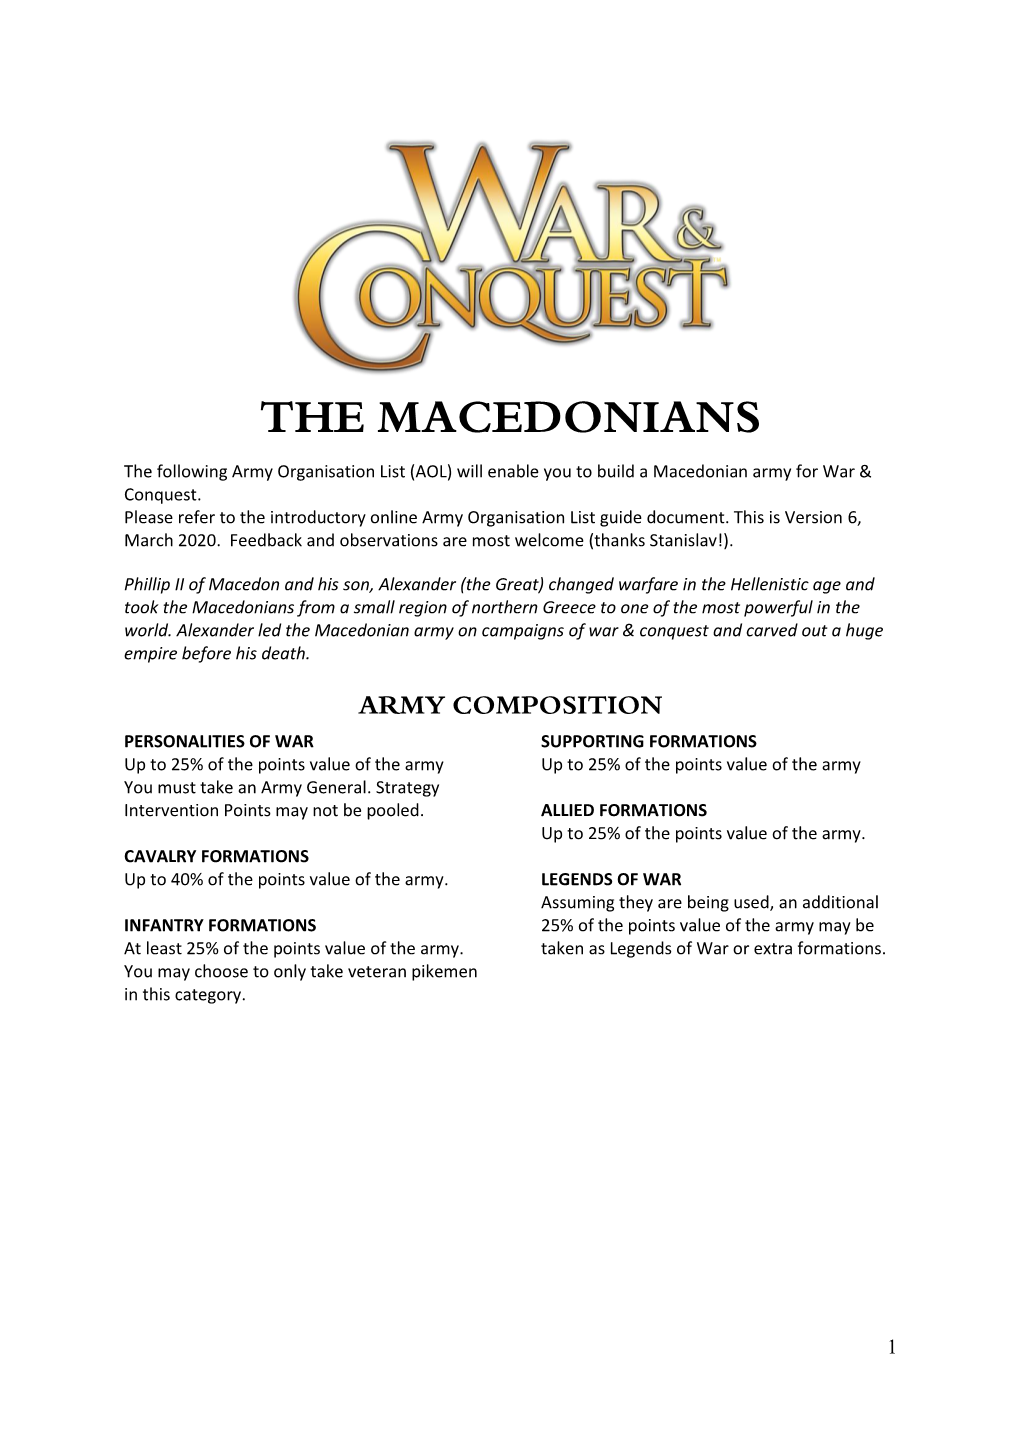 THE MACEDONIANS the Following Army Organisation List (AOL) Will Enable You to Build a Macedonian Army for War & Conquest